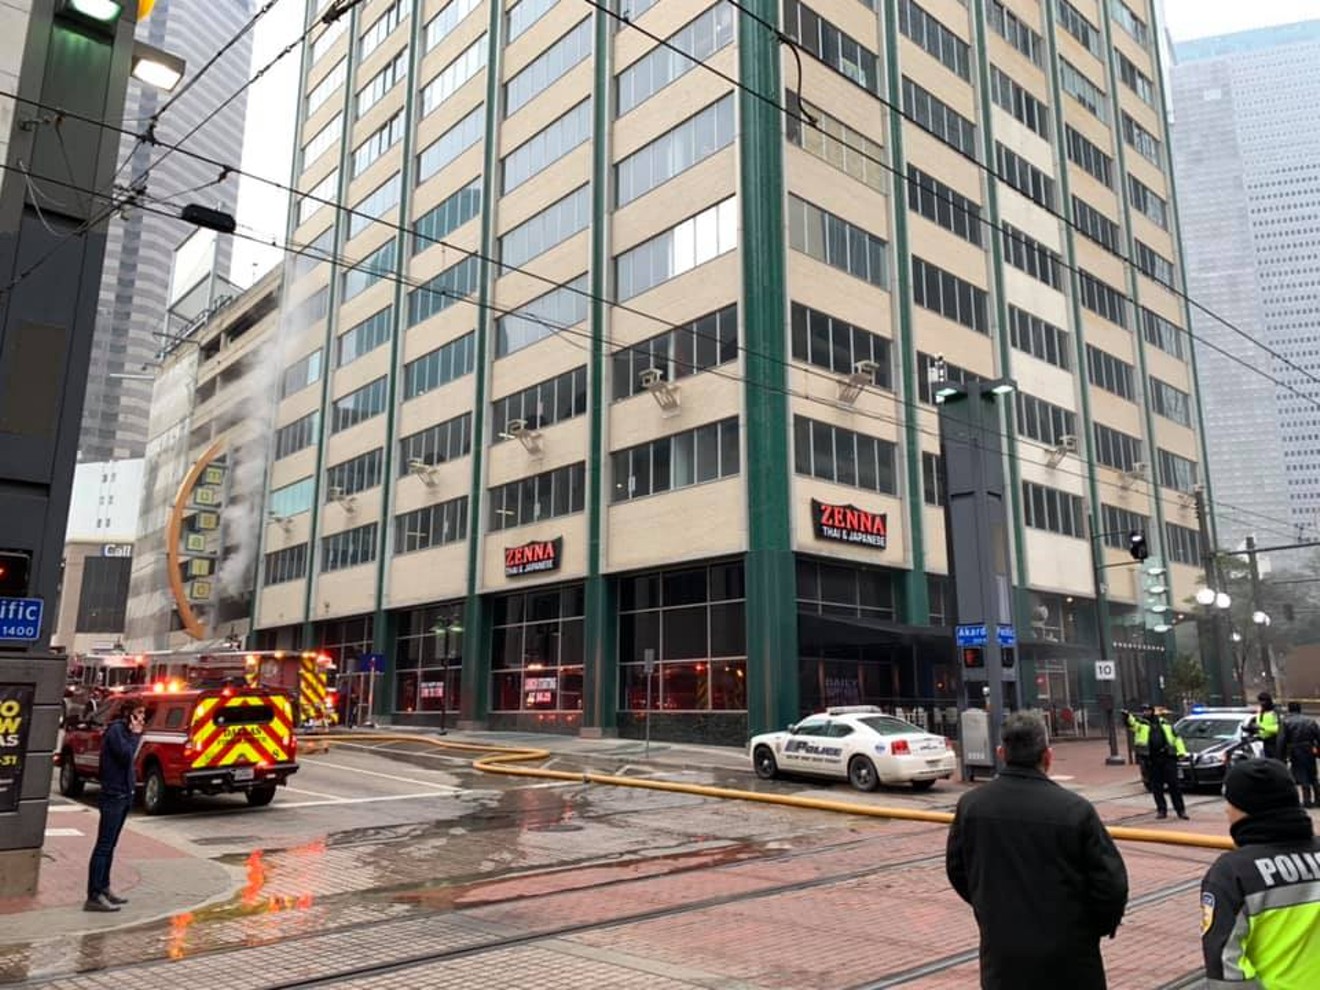 Carl Azbell, a broker at Metroplex Realty, snapped this photo of the scene downtown on Thursday as firefighters battled a blaze that started in Zenna Thai's kitchen.